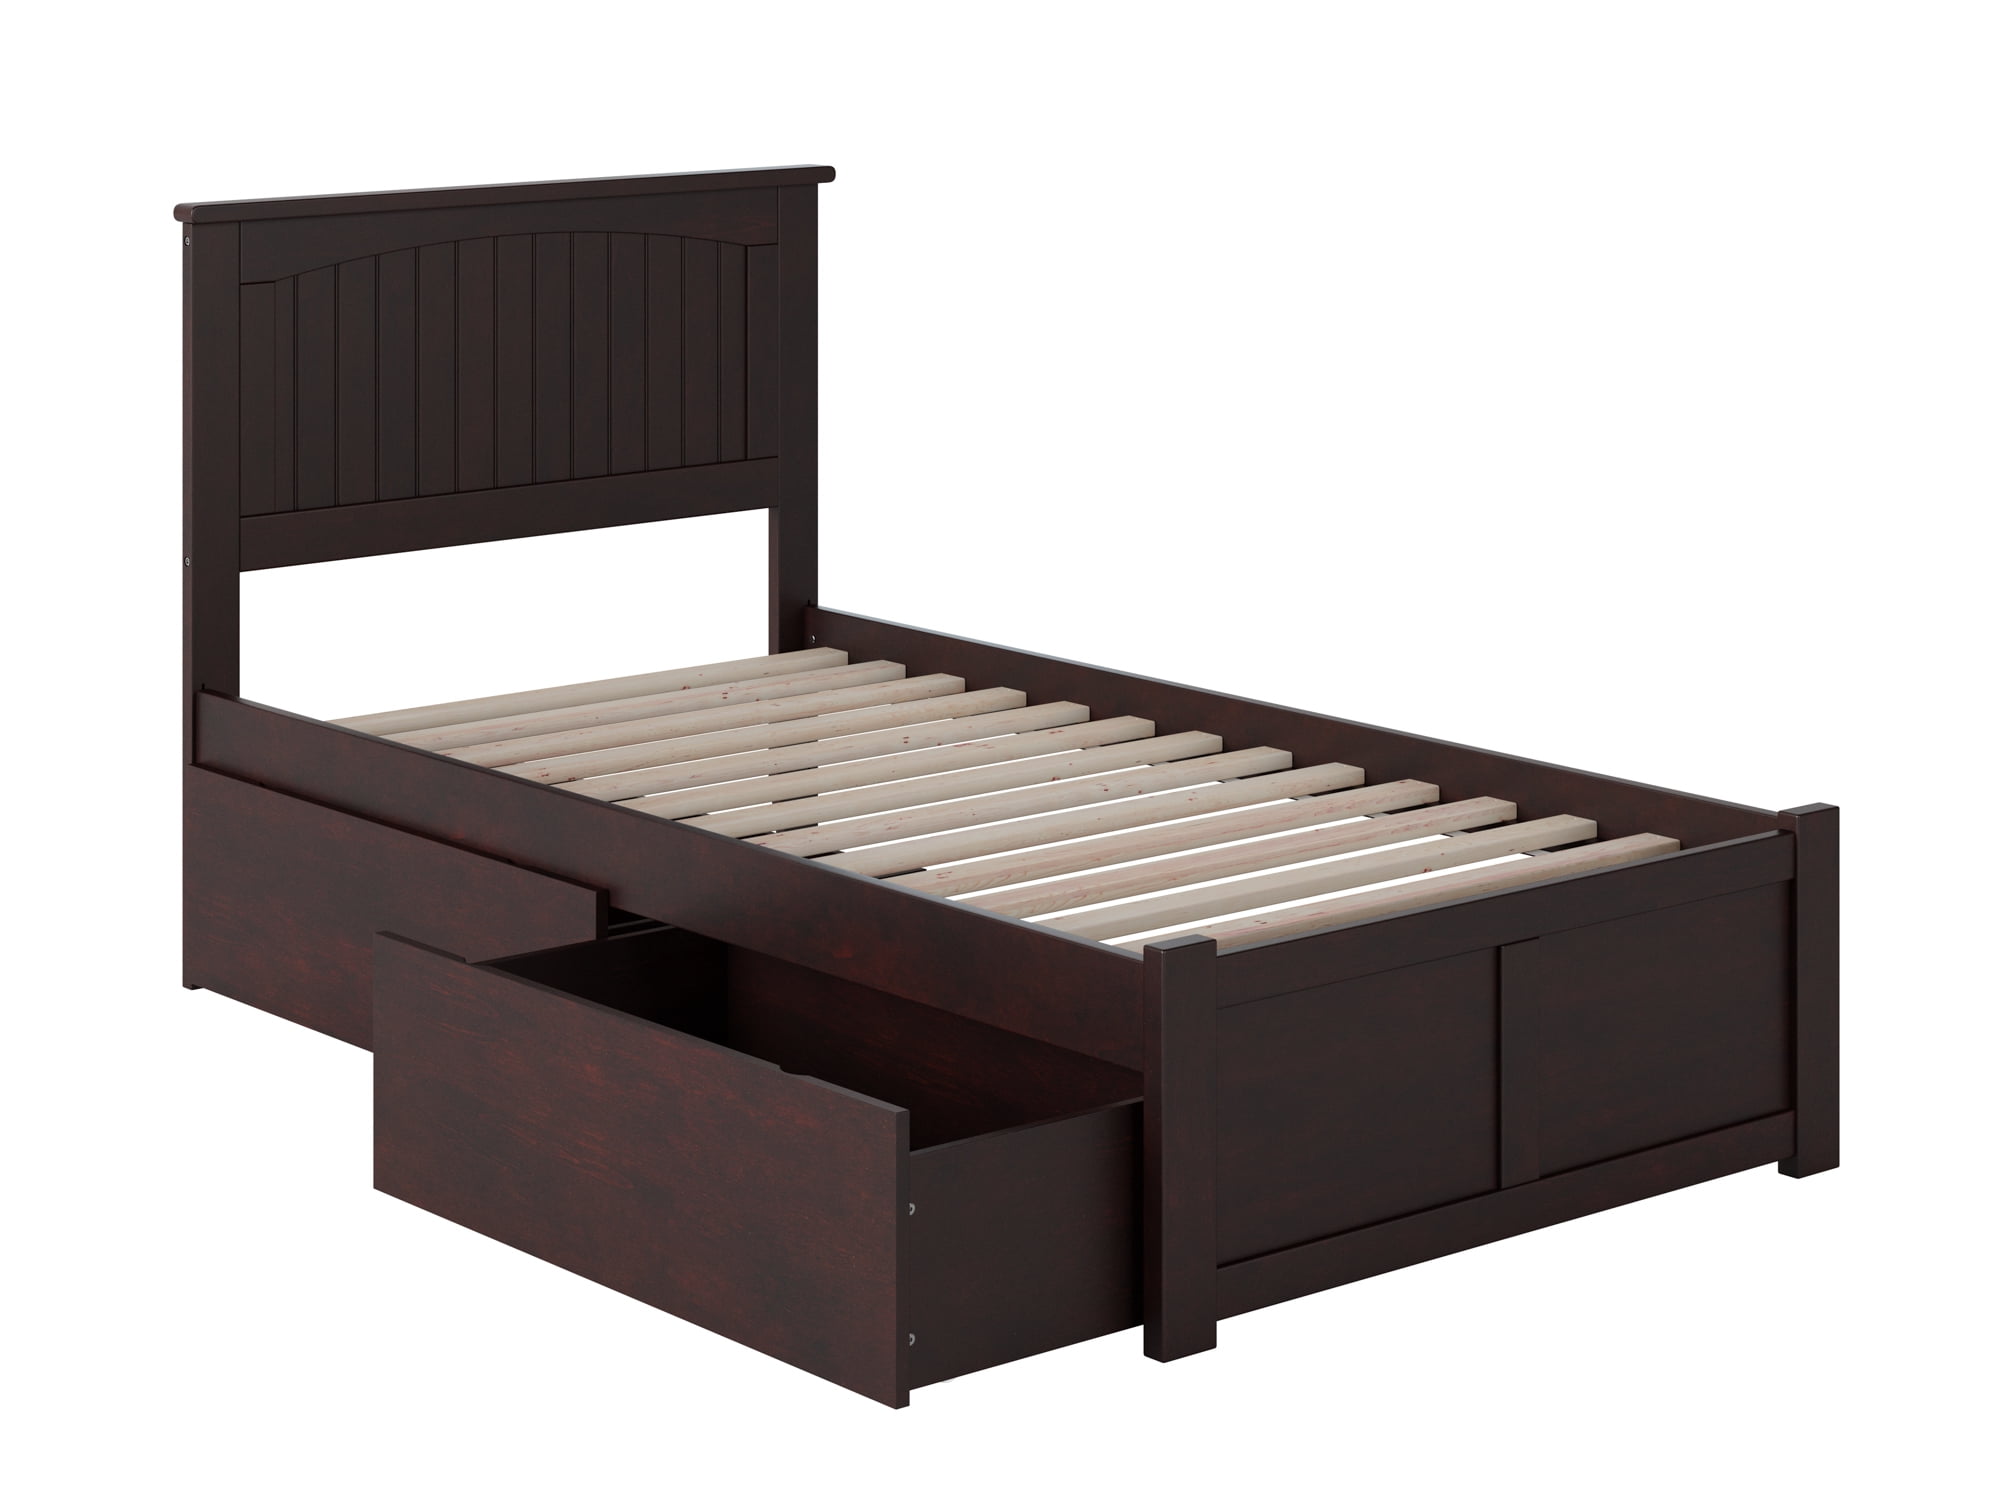 Picture of Atlantic Furniture AR8212111 Nantucket Panel Footboard & Urban Bed Drawers, Espresso - Twin Extra Large